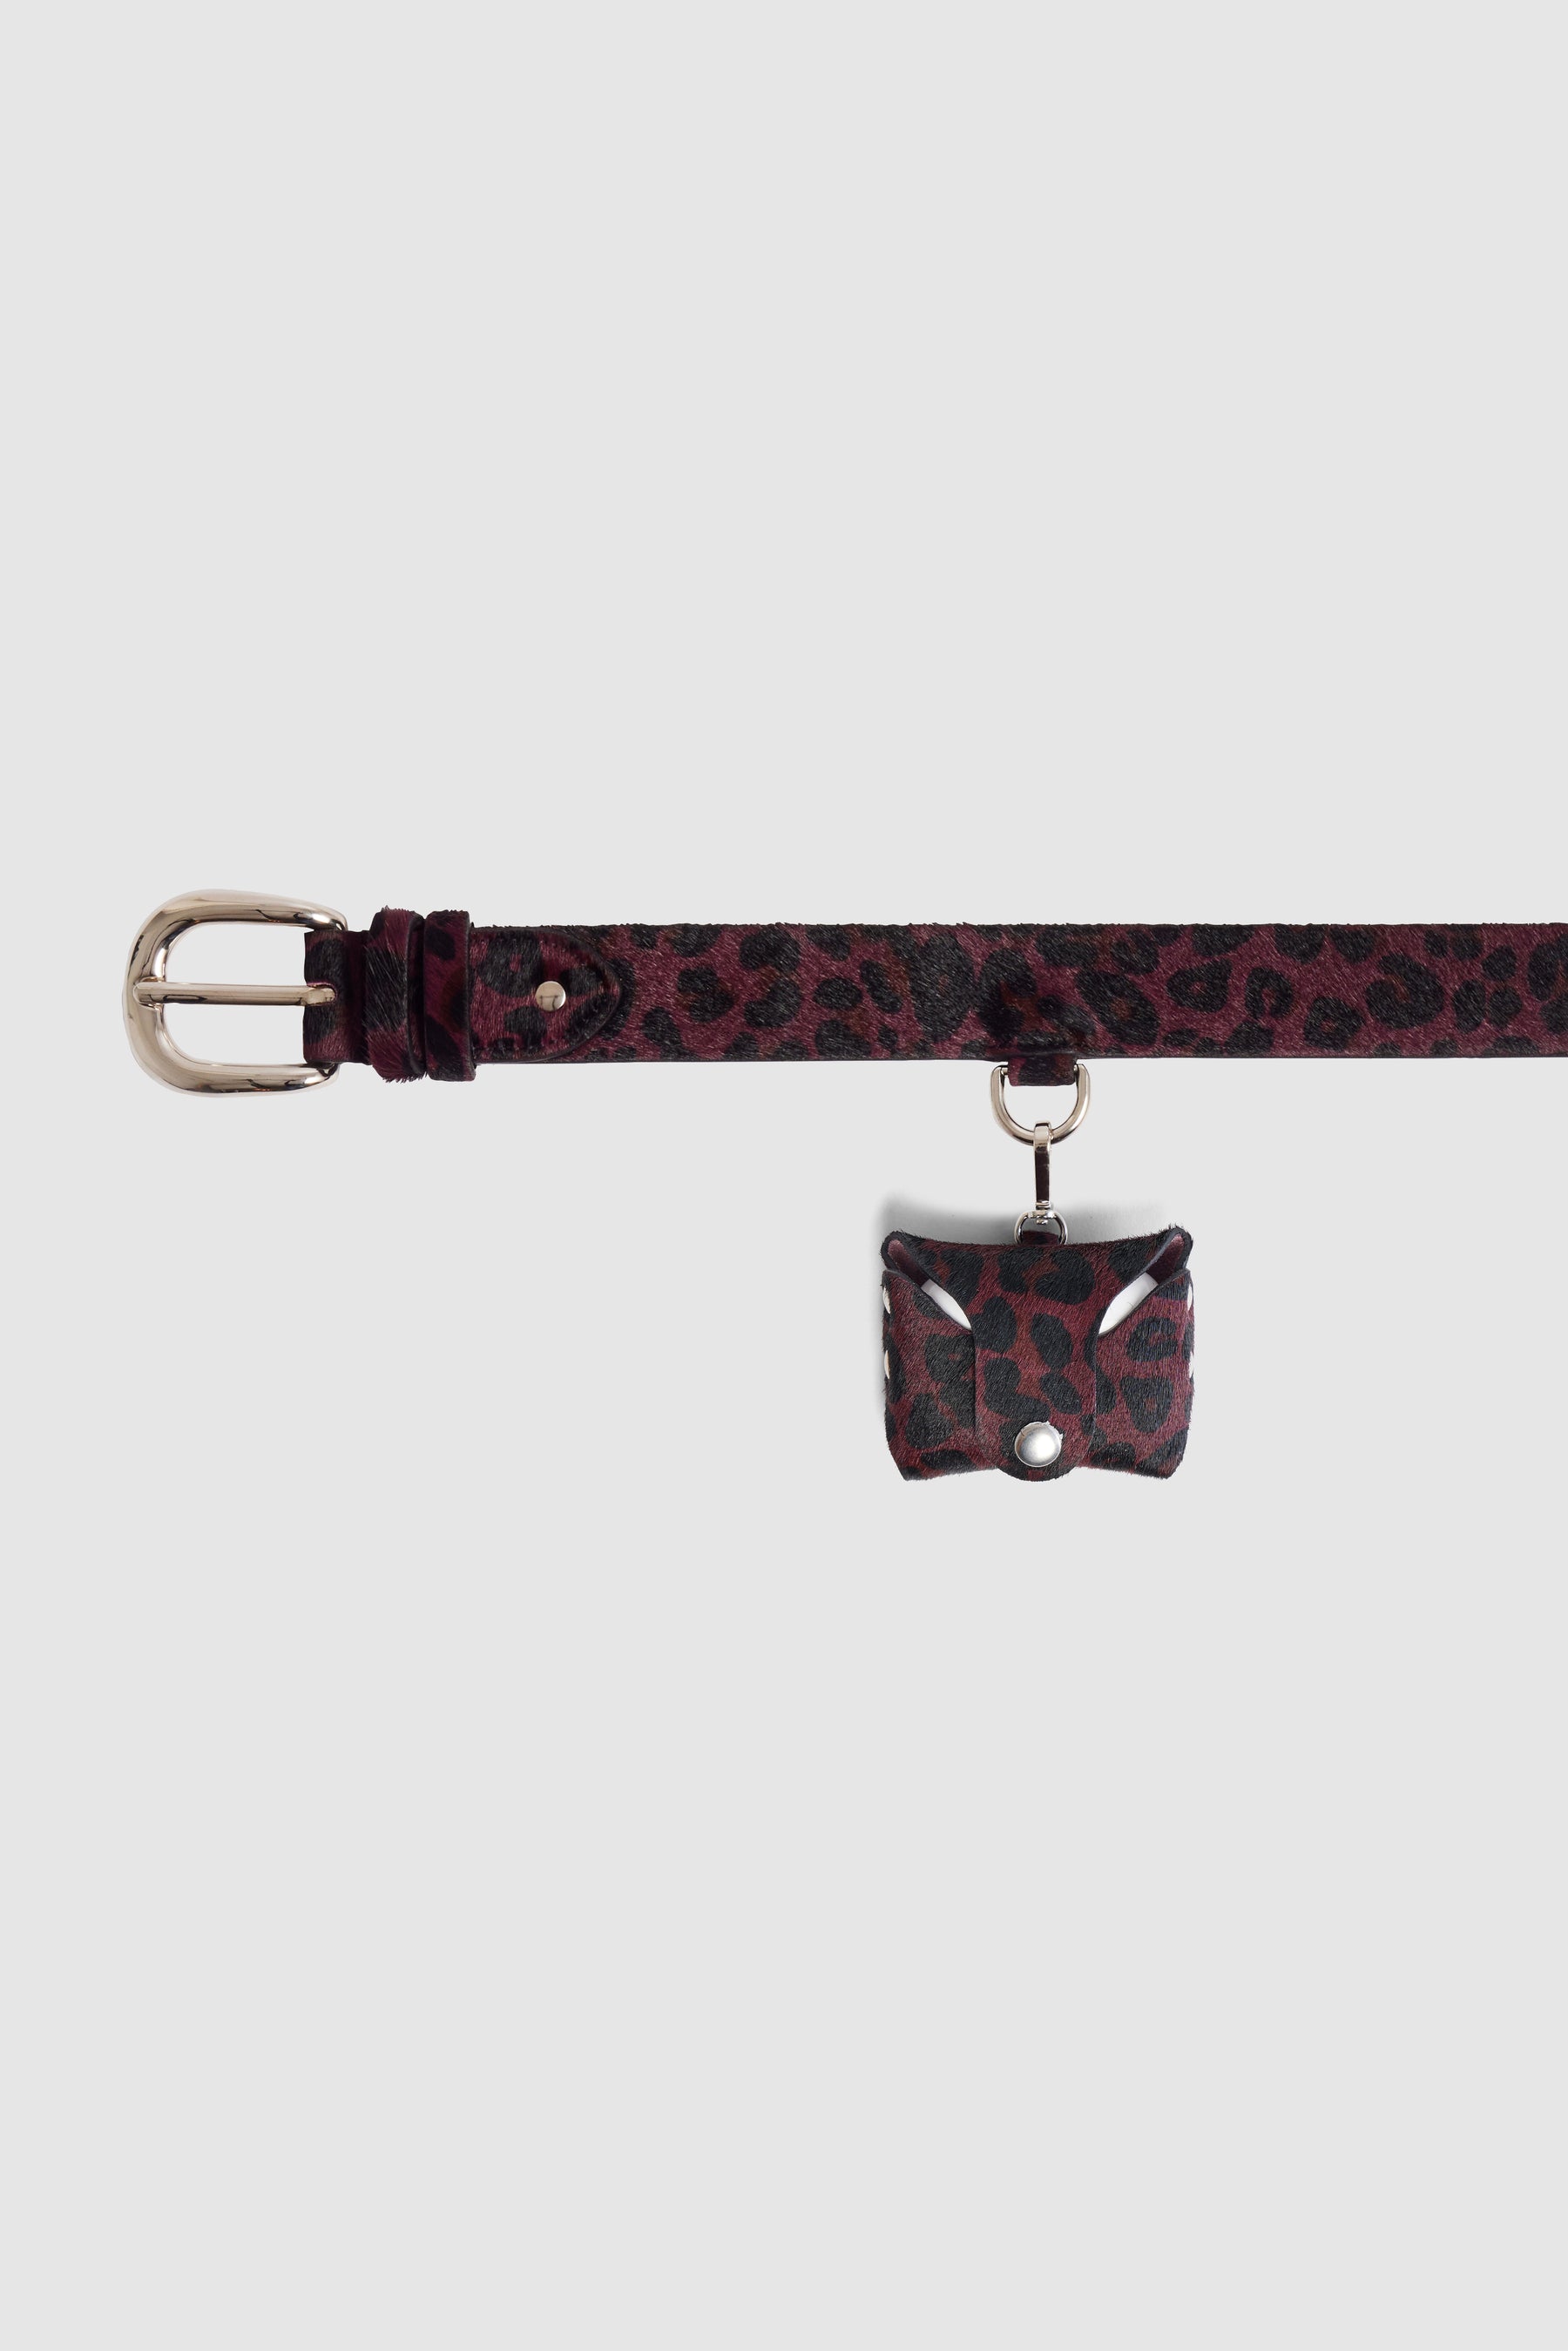 The Minis - Pro Airpods case in burgundy Leopard printed leather